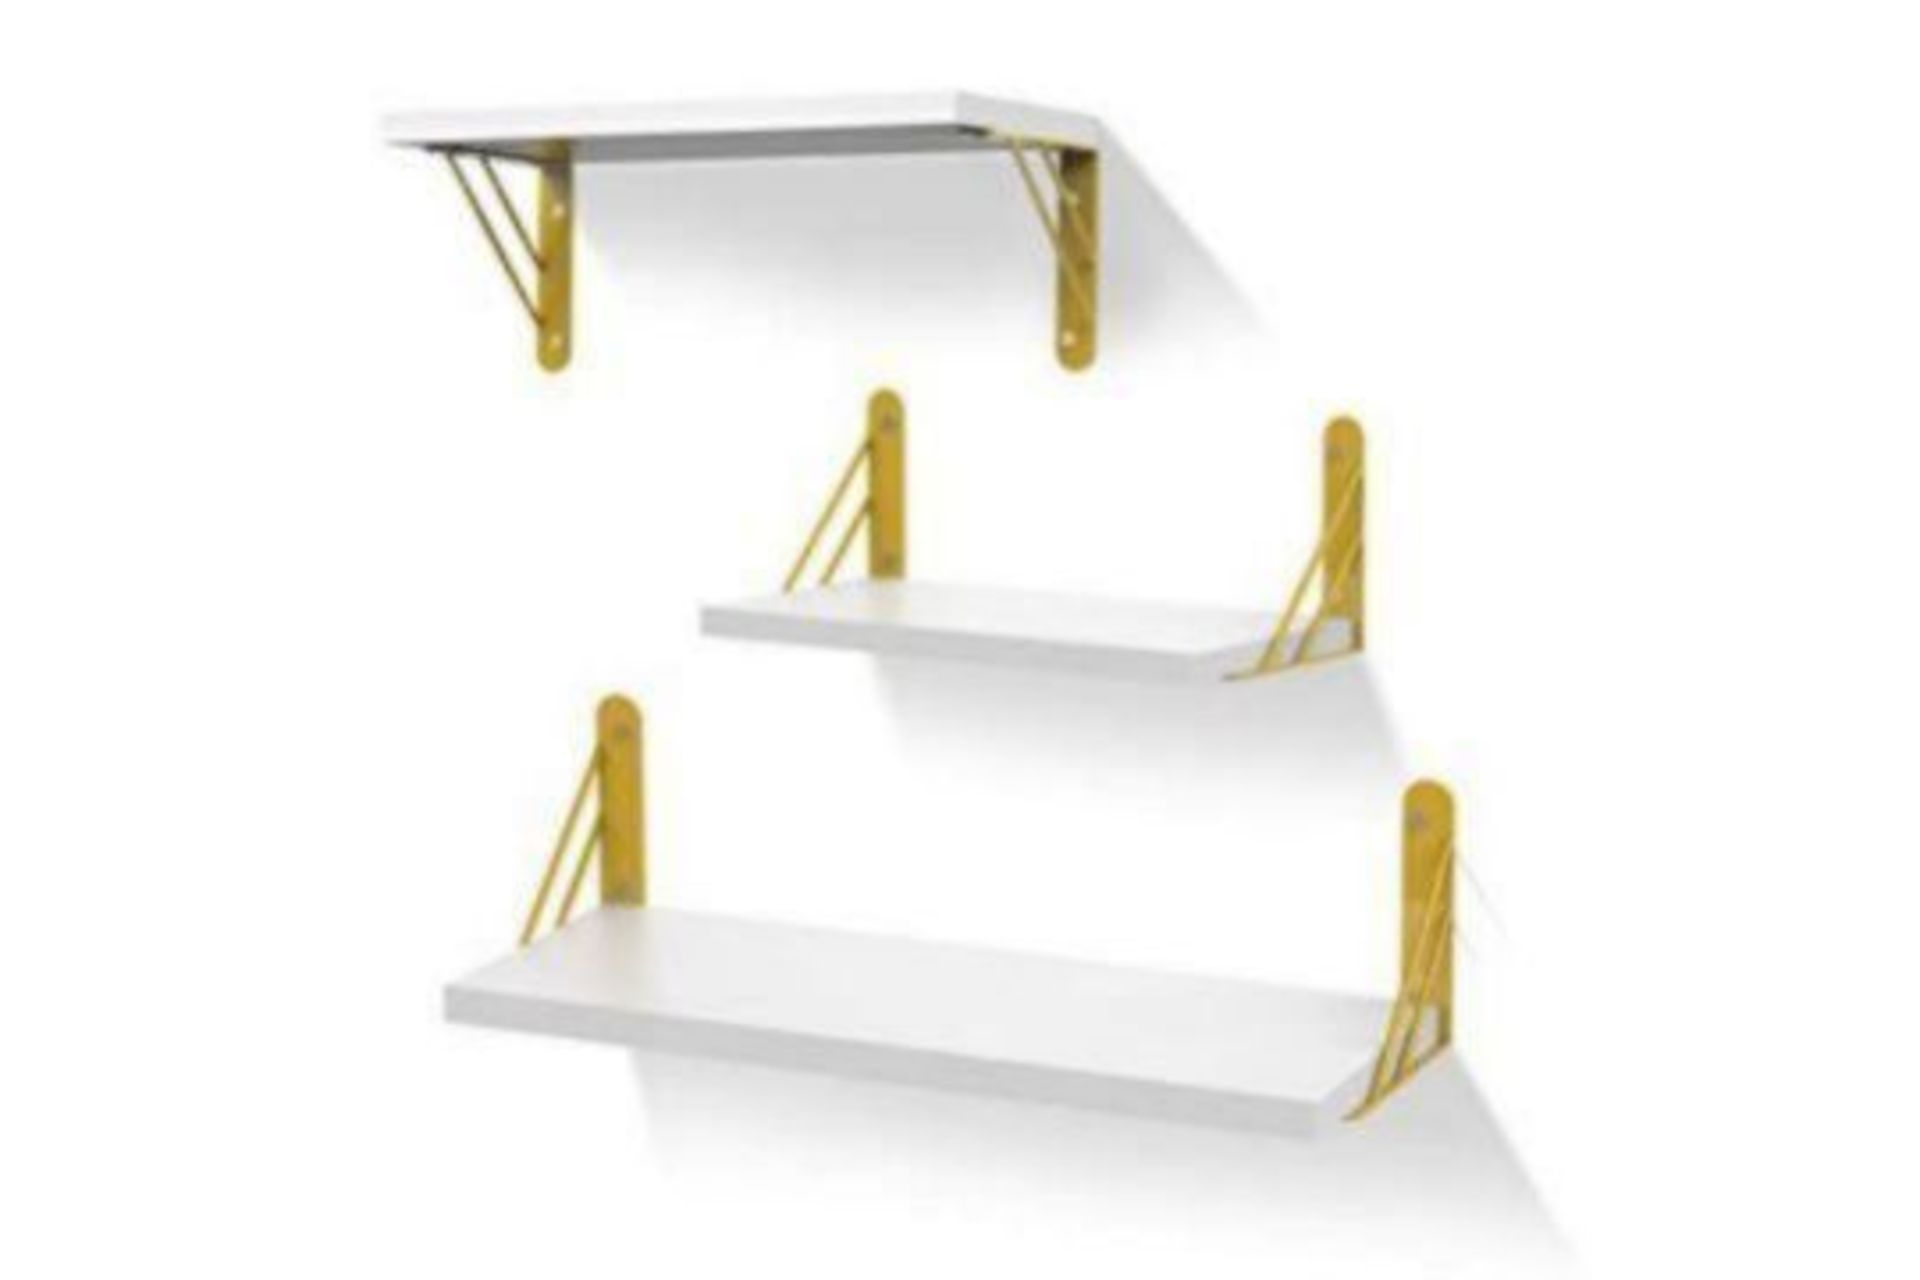 12 X BRAND NEW SETS OF 3 WHITE FLOATING SHELF WITH GOLDEN HARDWARE BRACKETS RRP £60 EACH S1P